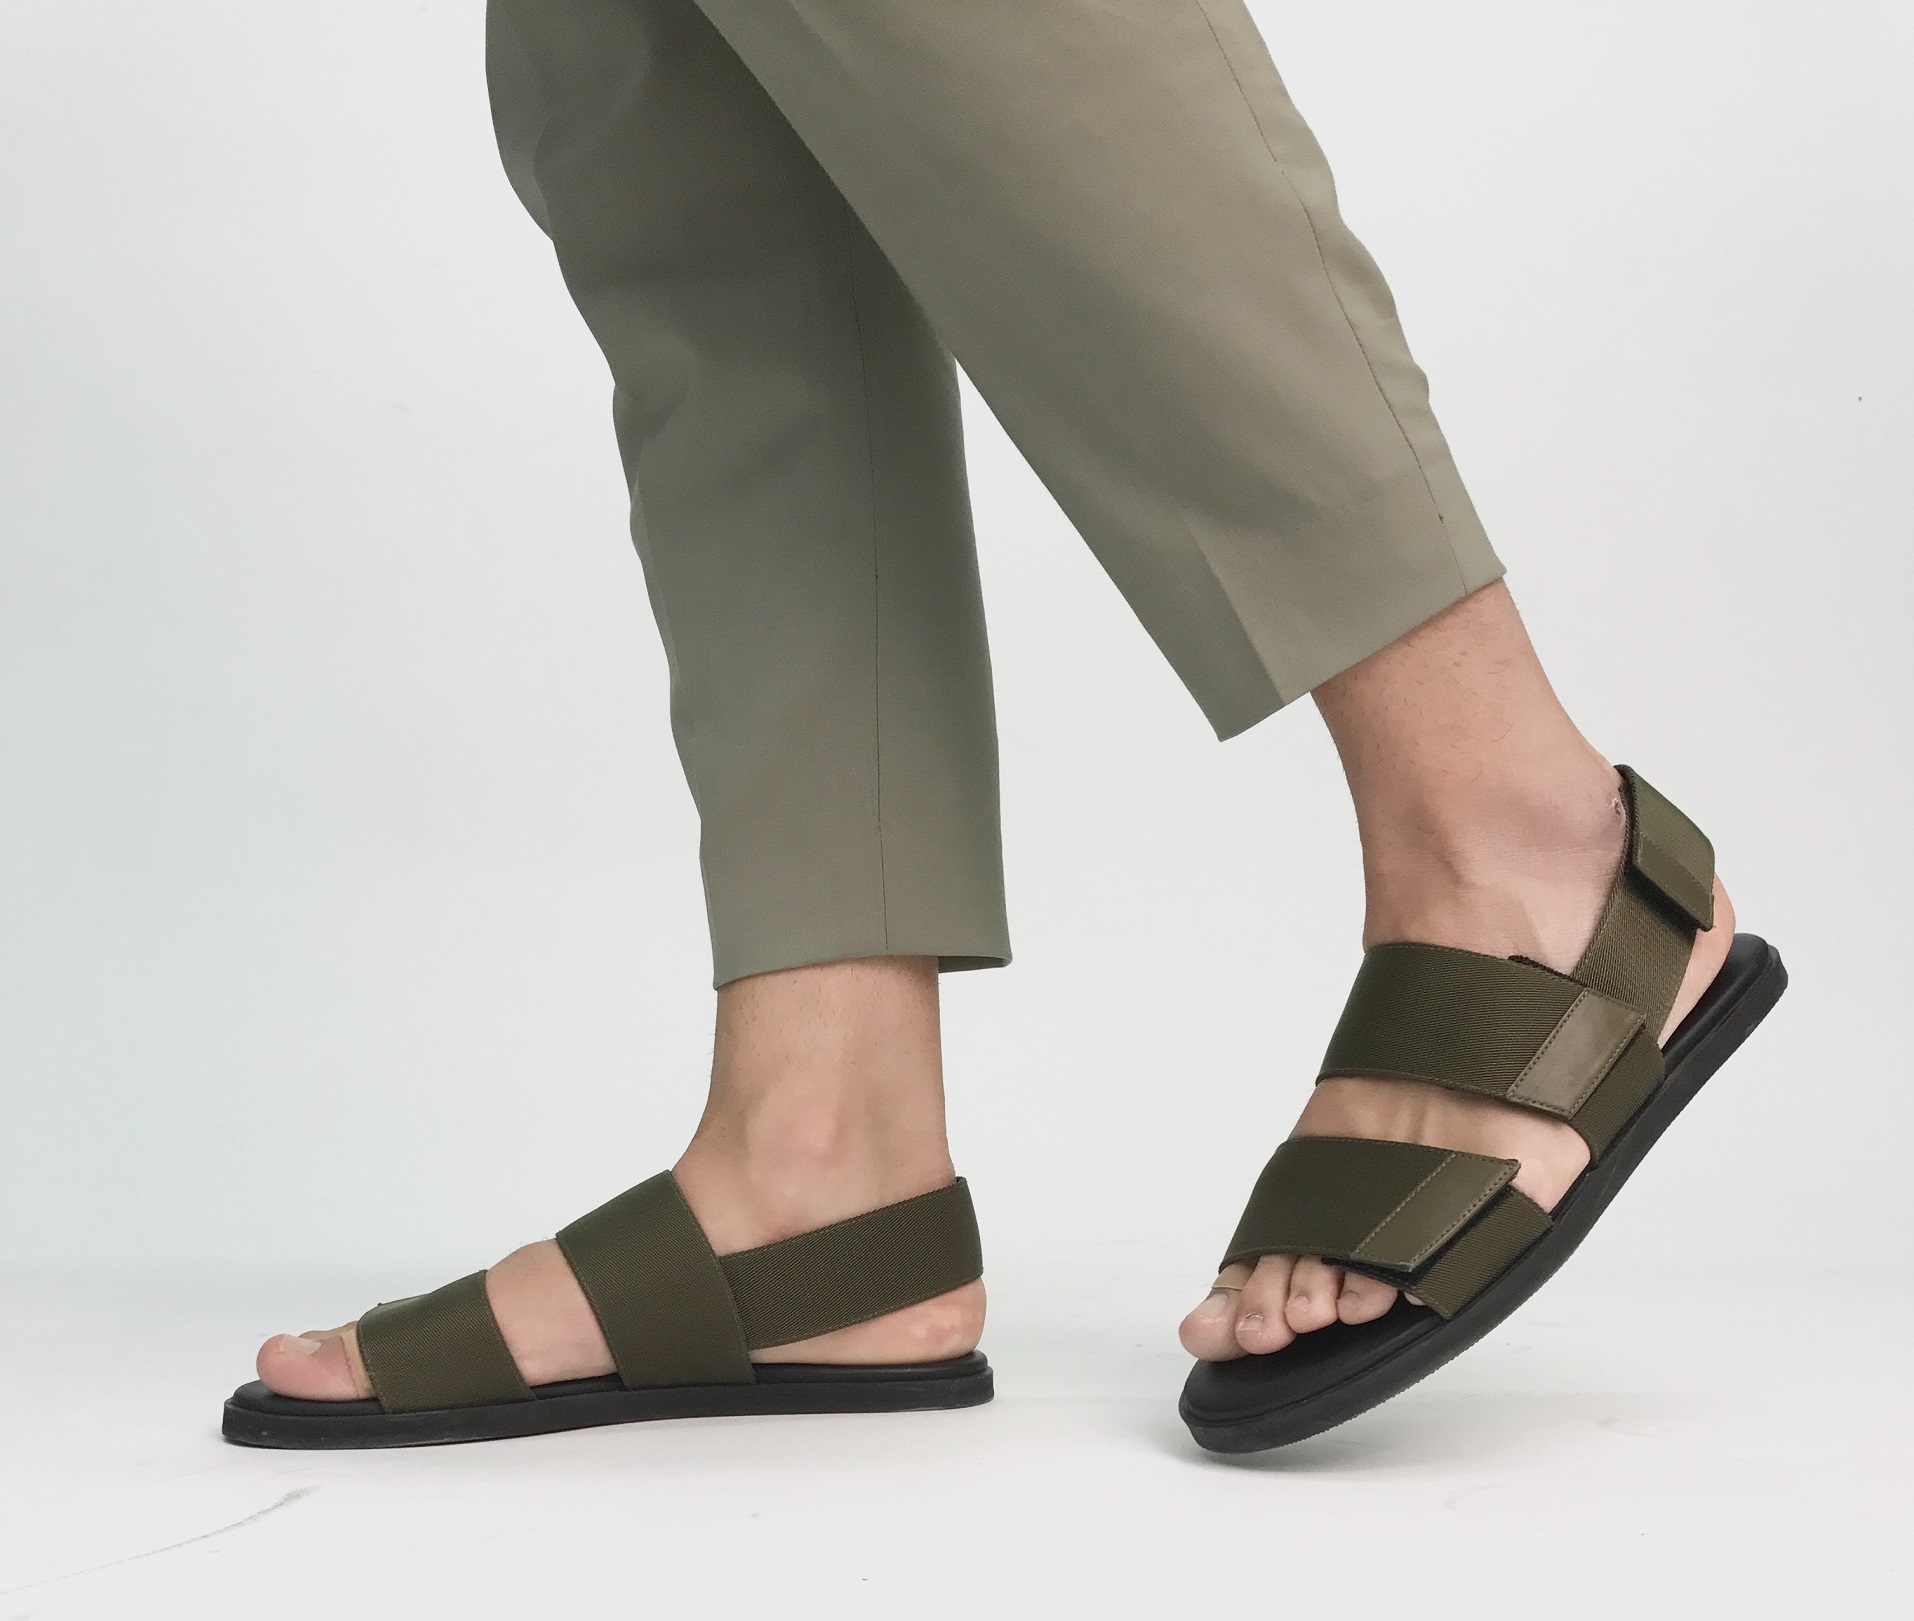 Sandals are a good option for men. 